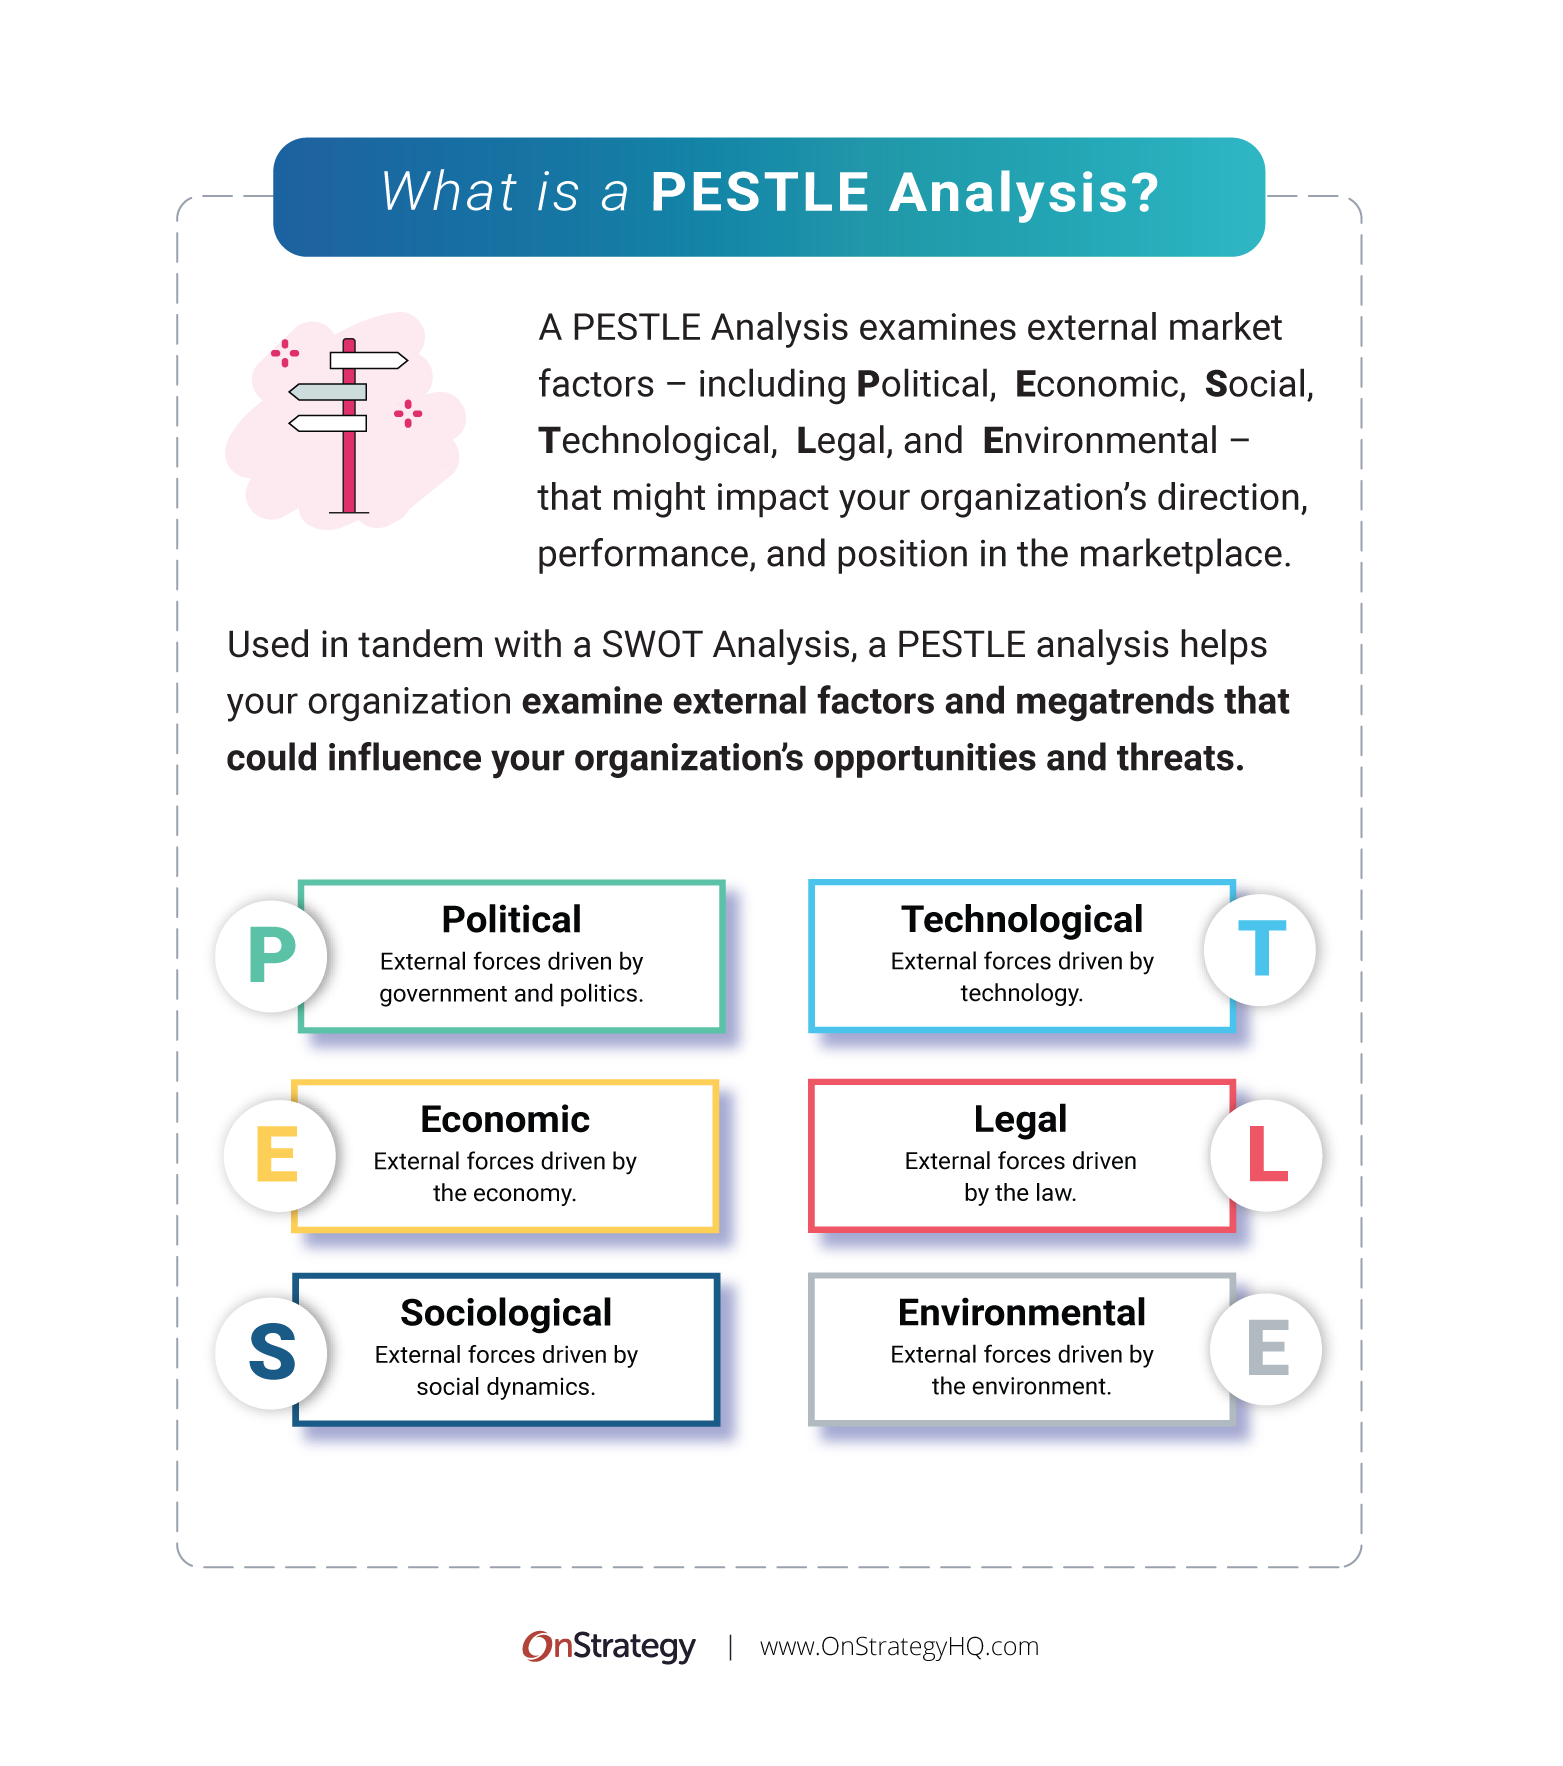 What is a Pestle Analysis